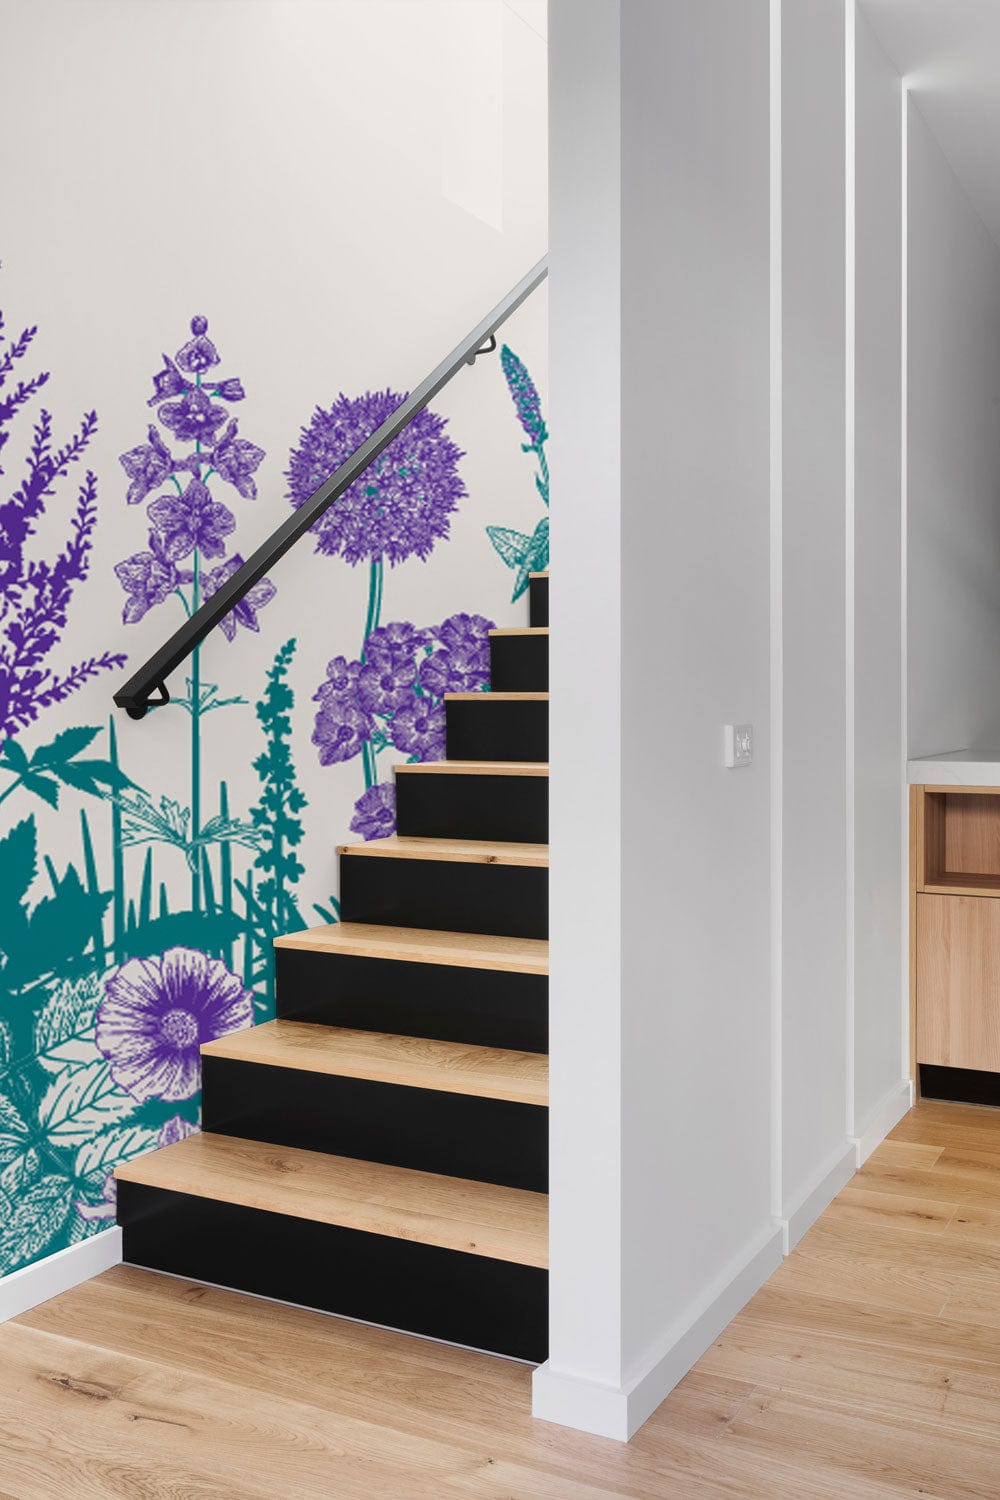 Hallway Decoration Featuring a Wallpaper Mural with Purple and Turquoise Flowers